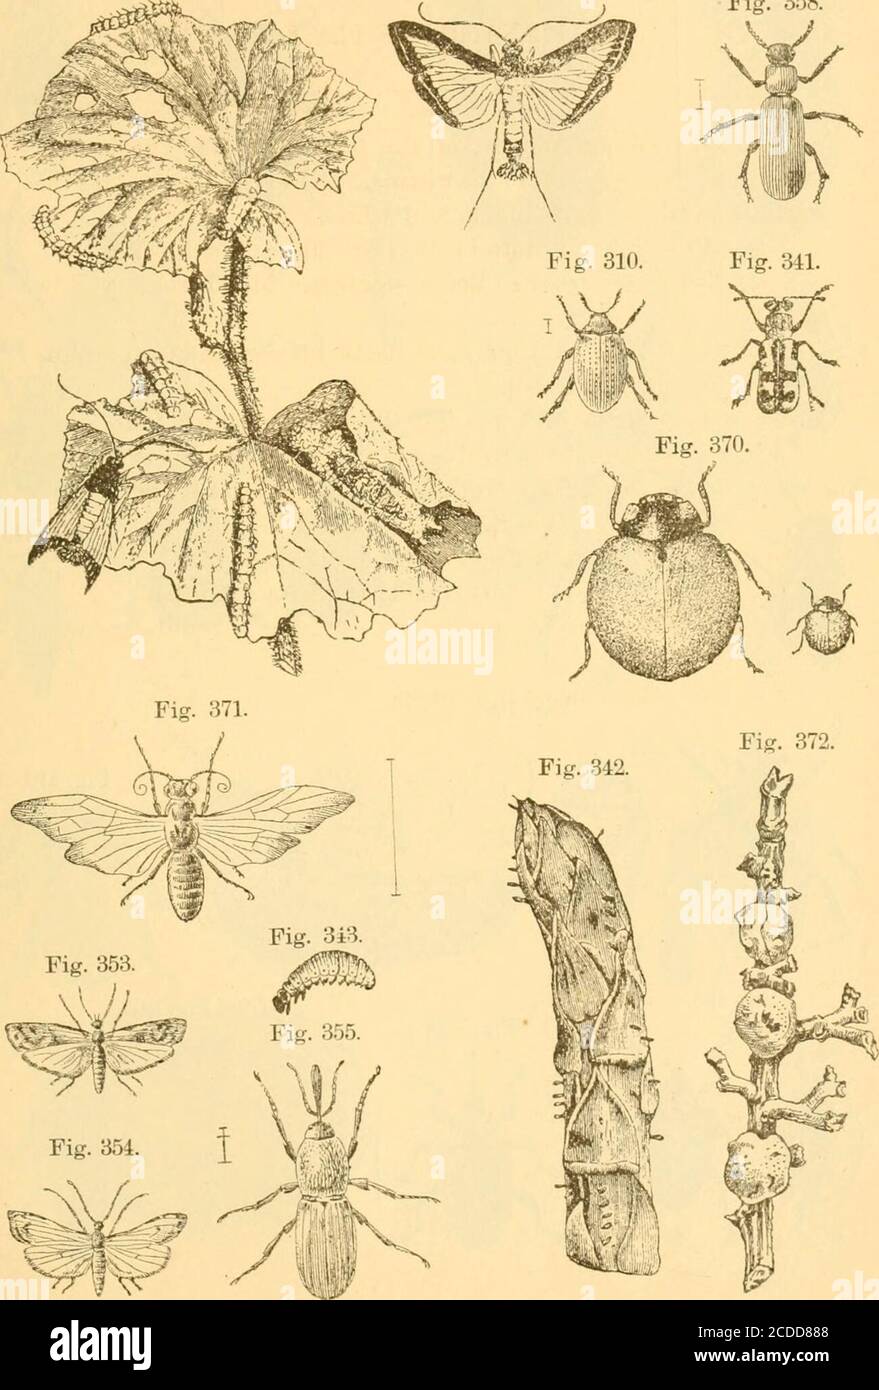 . Injurious insects of the orchard, vineyard, field, garden, conservatory, household, storehouse, domestic animals, etc., with remedies for their extermination . 430 EXPLANATION OF FIGURES, PLATE 4 EXPLANATION OF PLATE 4. Fig. 297.—Melon Worm ; at the left, several of the wormson some leaves—color of worms, yellowish-green; at theright, a moth—colors, black and white. Fig. 310.—Small Potato-beetle (No. 1)—color, black. Fig. 841.—Asparagus Beetle—colors, blue-black, yellowand red. Fig. 842.—Eggs of Asparagus Beetle on a stalk of as])aragus—color of eggs, blackish. Fig. 343.—Larva of Asparagus B Stock Photo